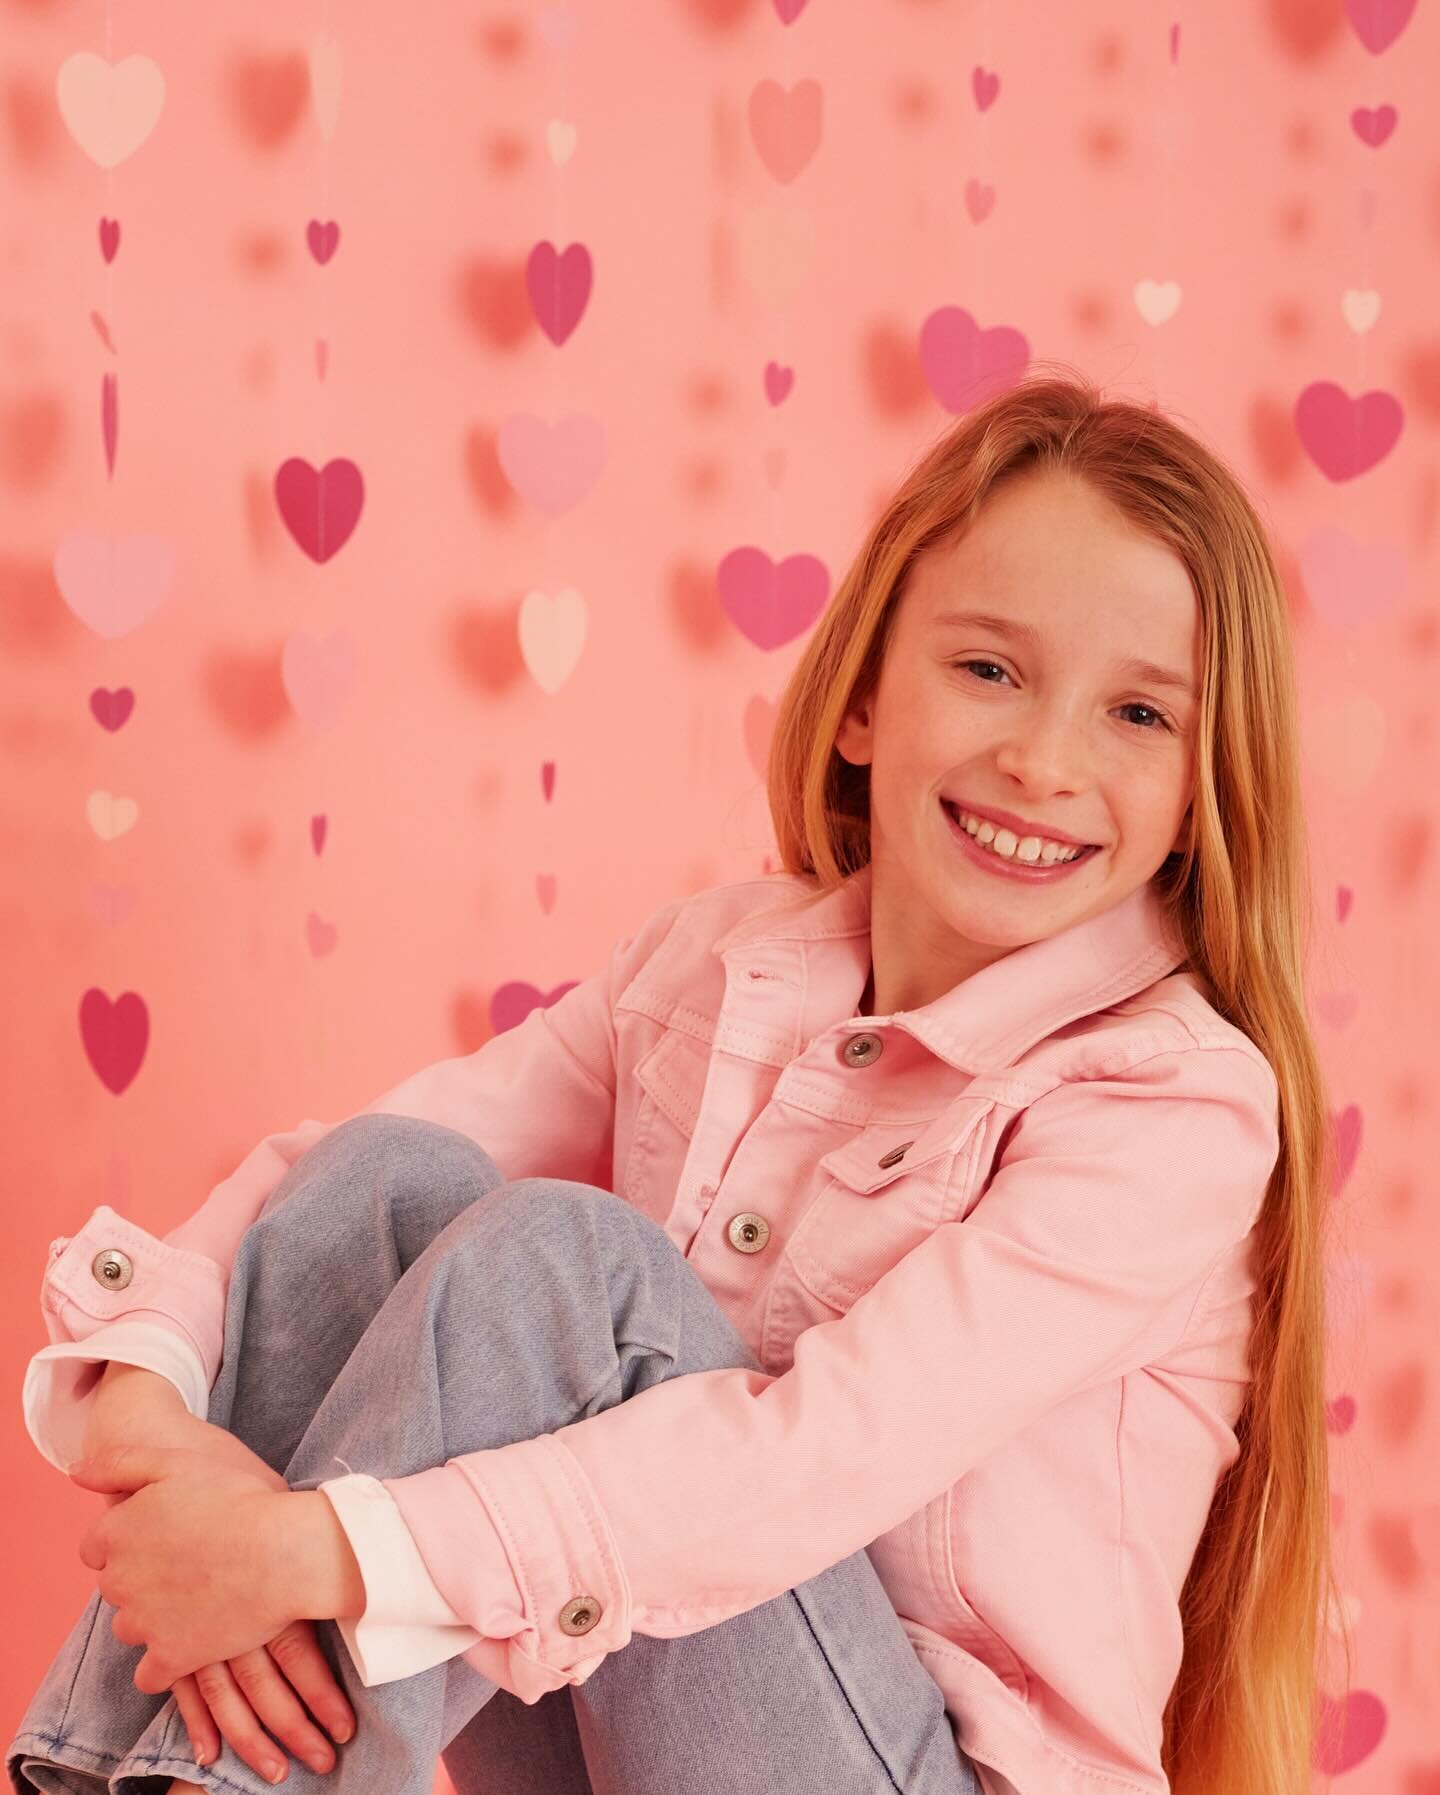 so much fun 💕 the adorable Dempsey crushed this photoshoot! @fulltankfitness @coachpatrickscanlon 

If you&rsquo;d like a &ldquo;pink hearts&rdquo; photoshoot for your little valentine (or yourself!) DM me for details 💕

📸 @whithawkinsphoto